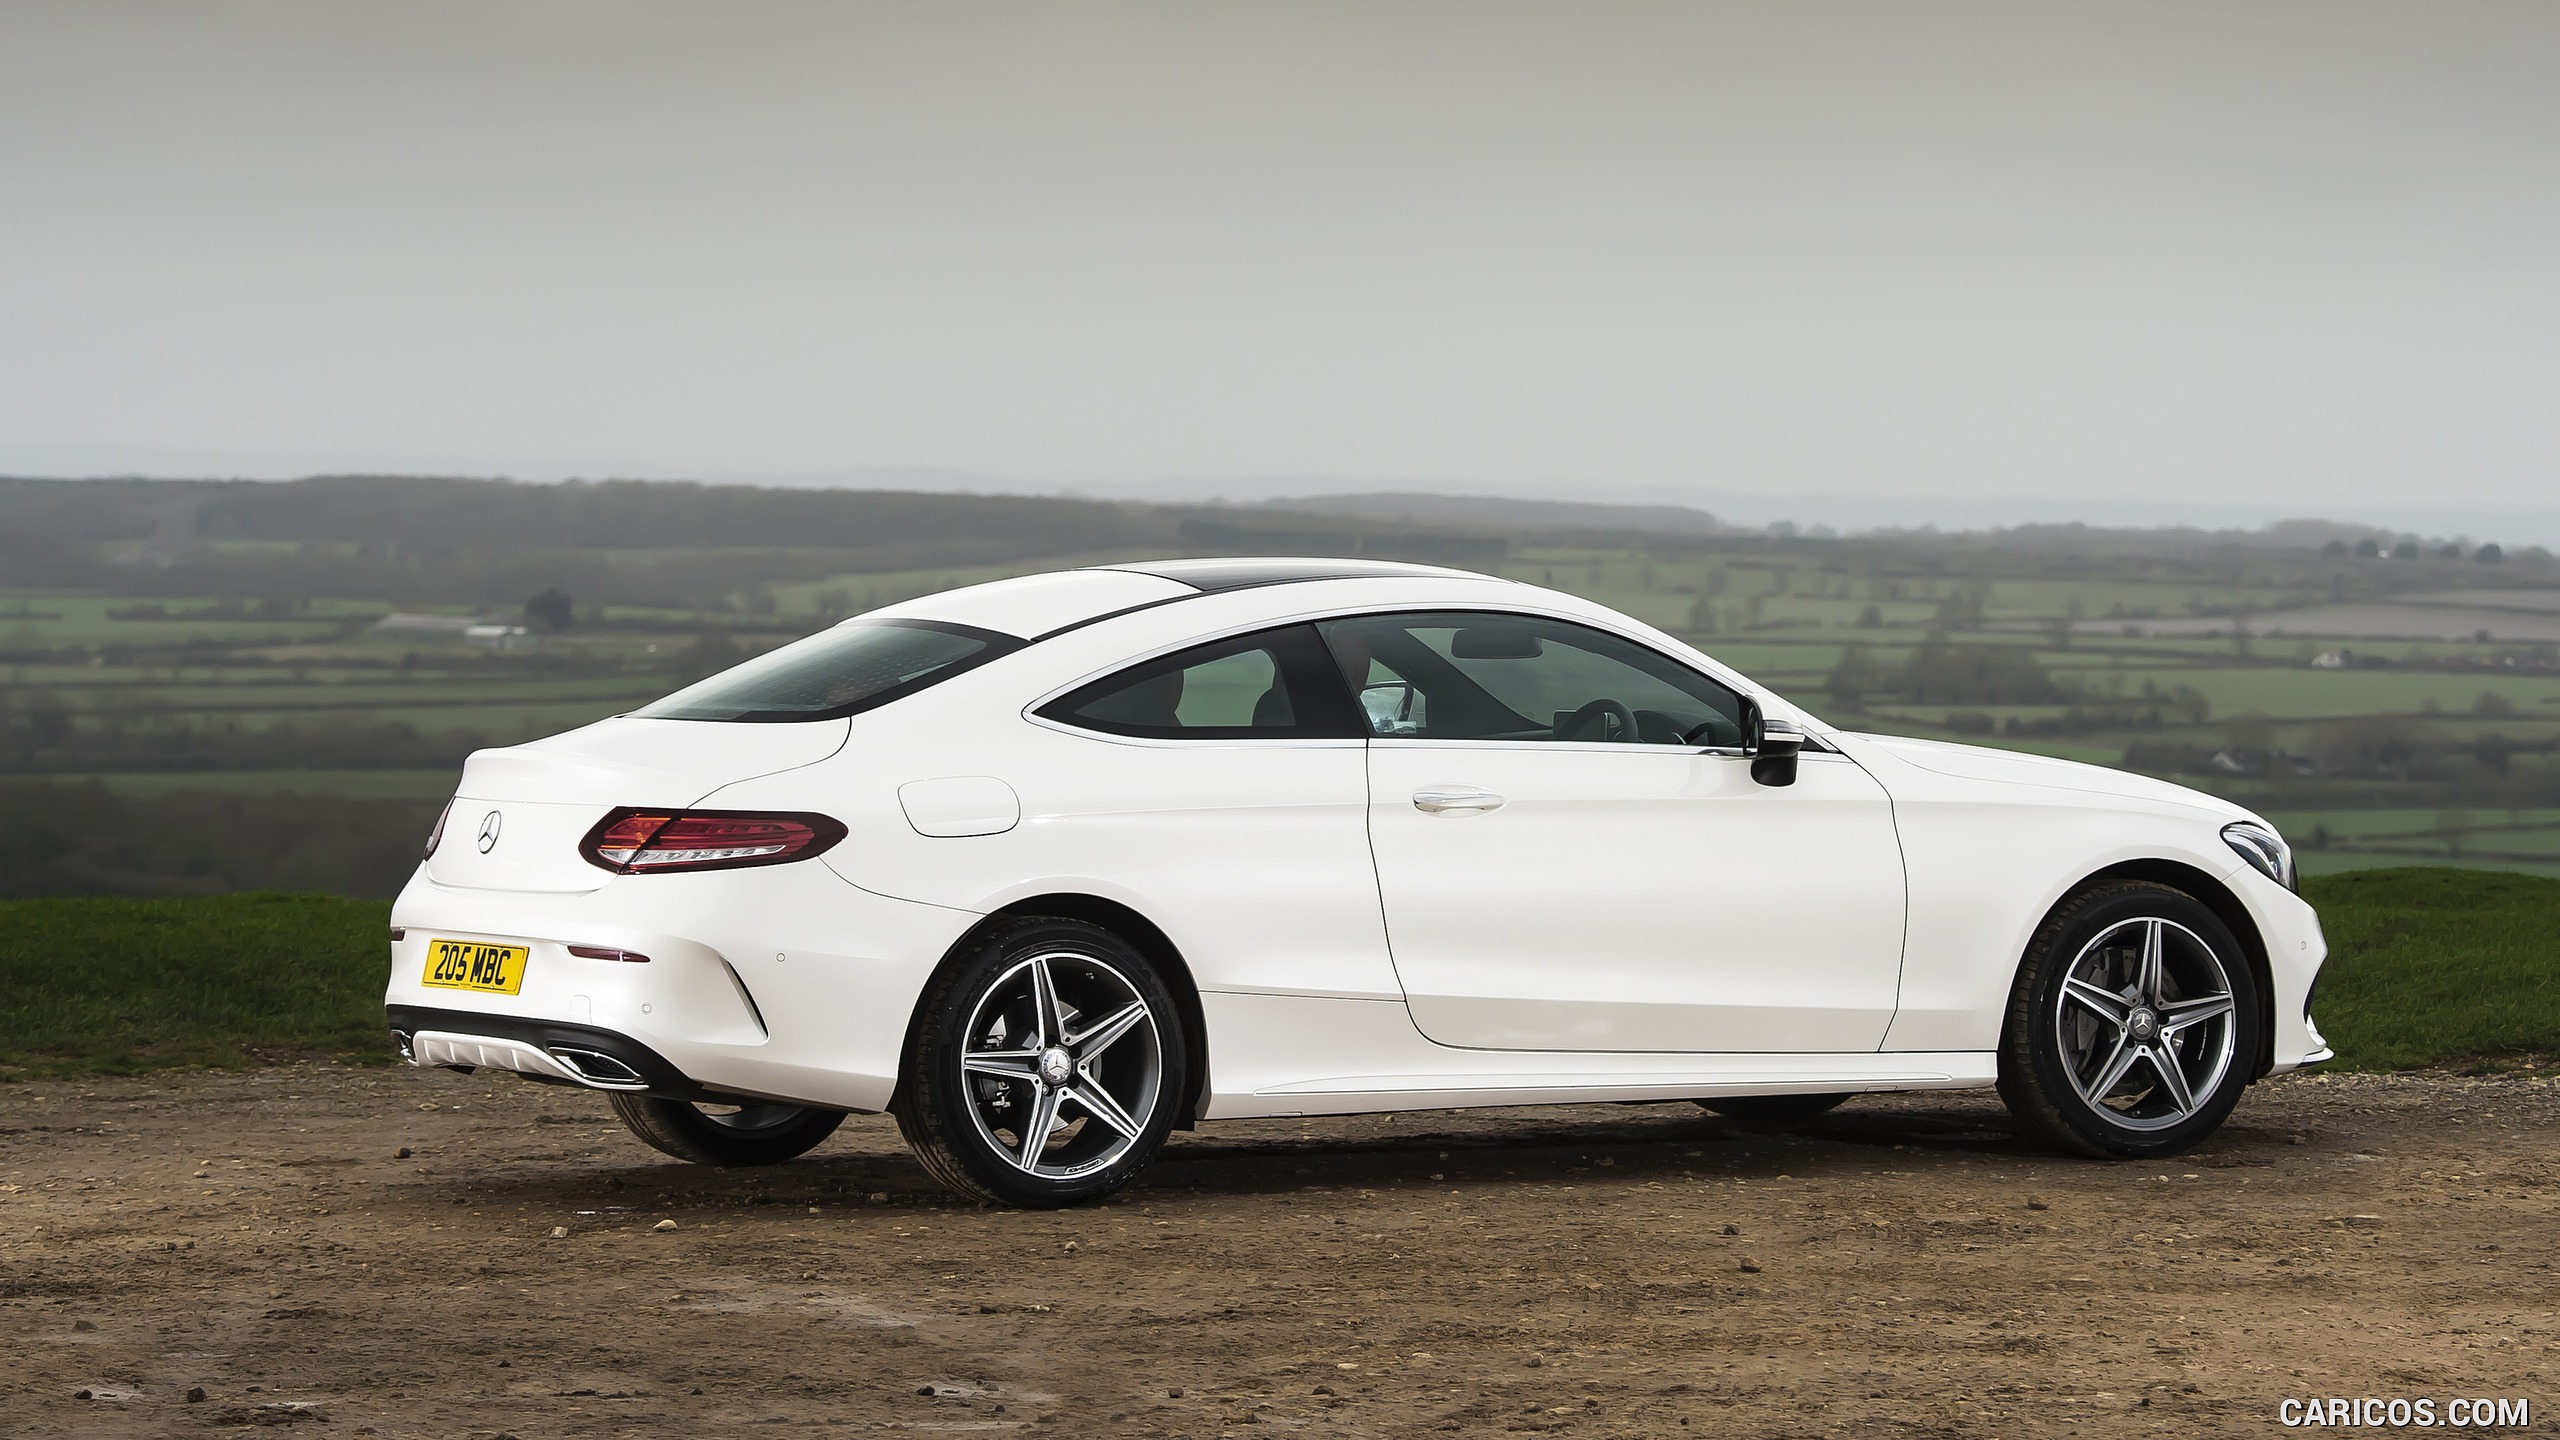 2017 Mercedes-Benz C-Class Coupe (UK-Spec) - Side, #111 of 210